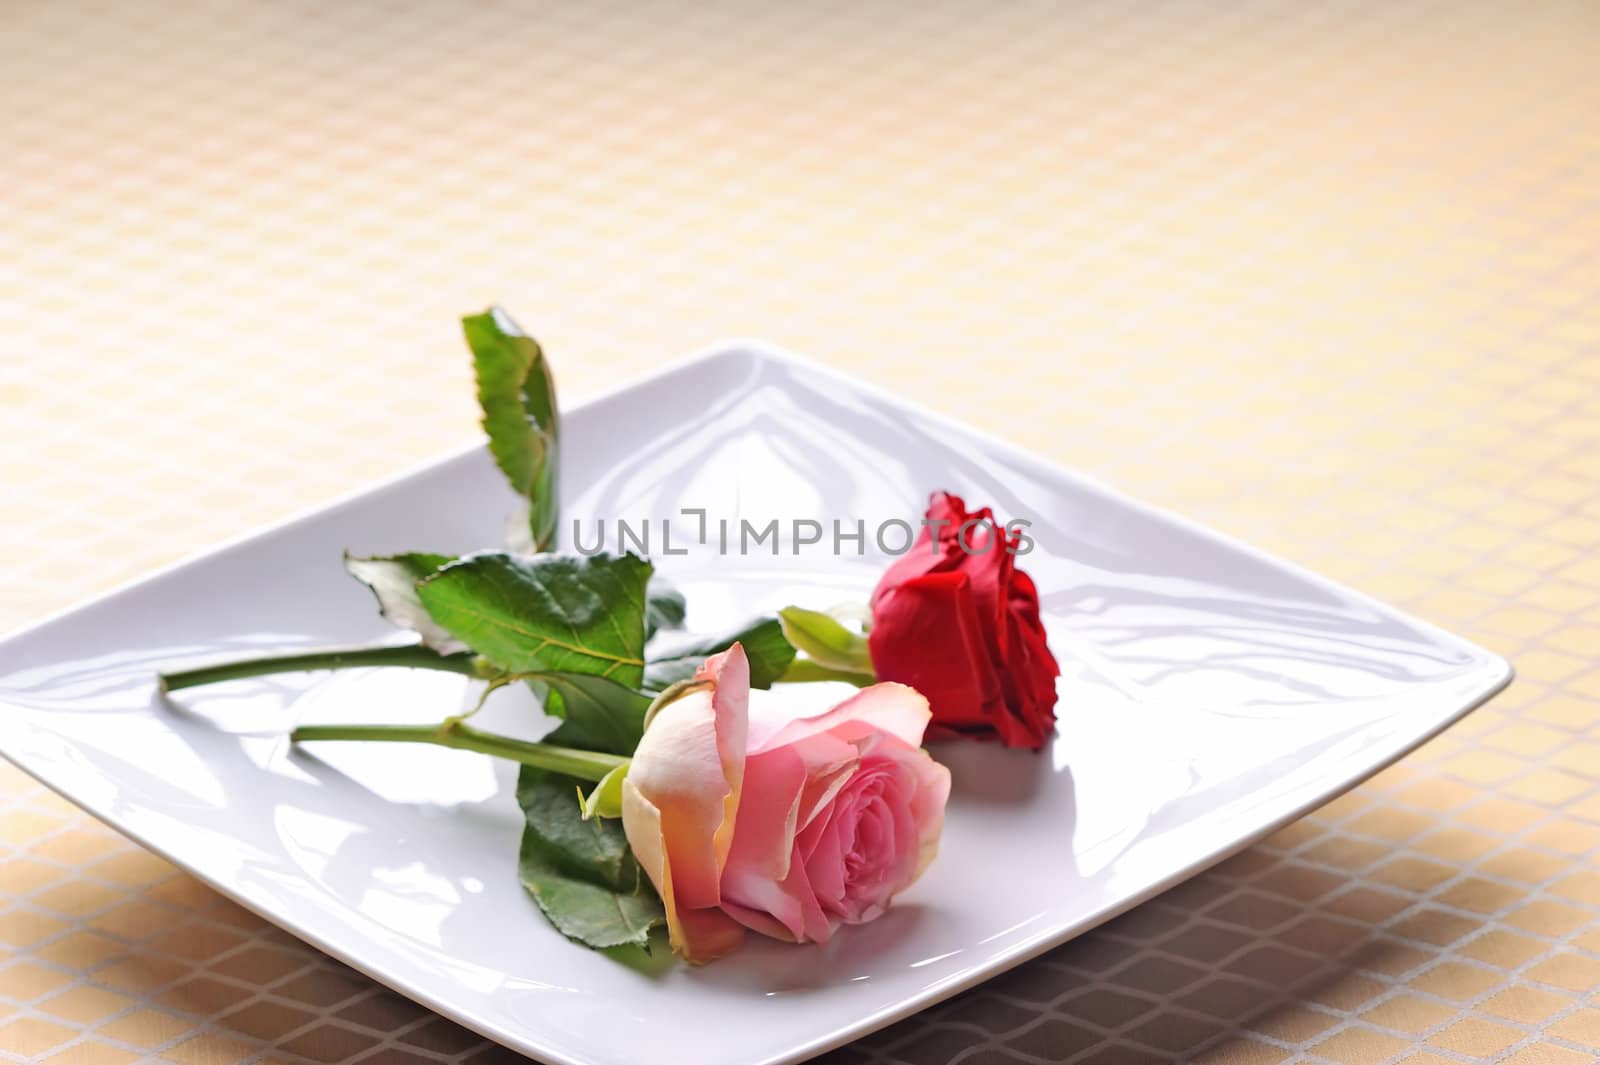 Romantic date, roses in the plate by Sevaljevic